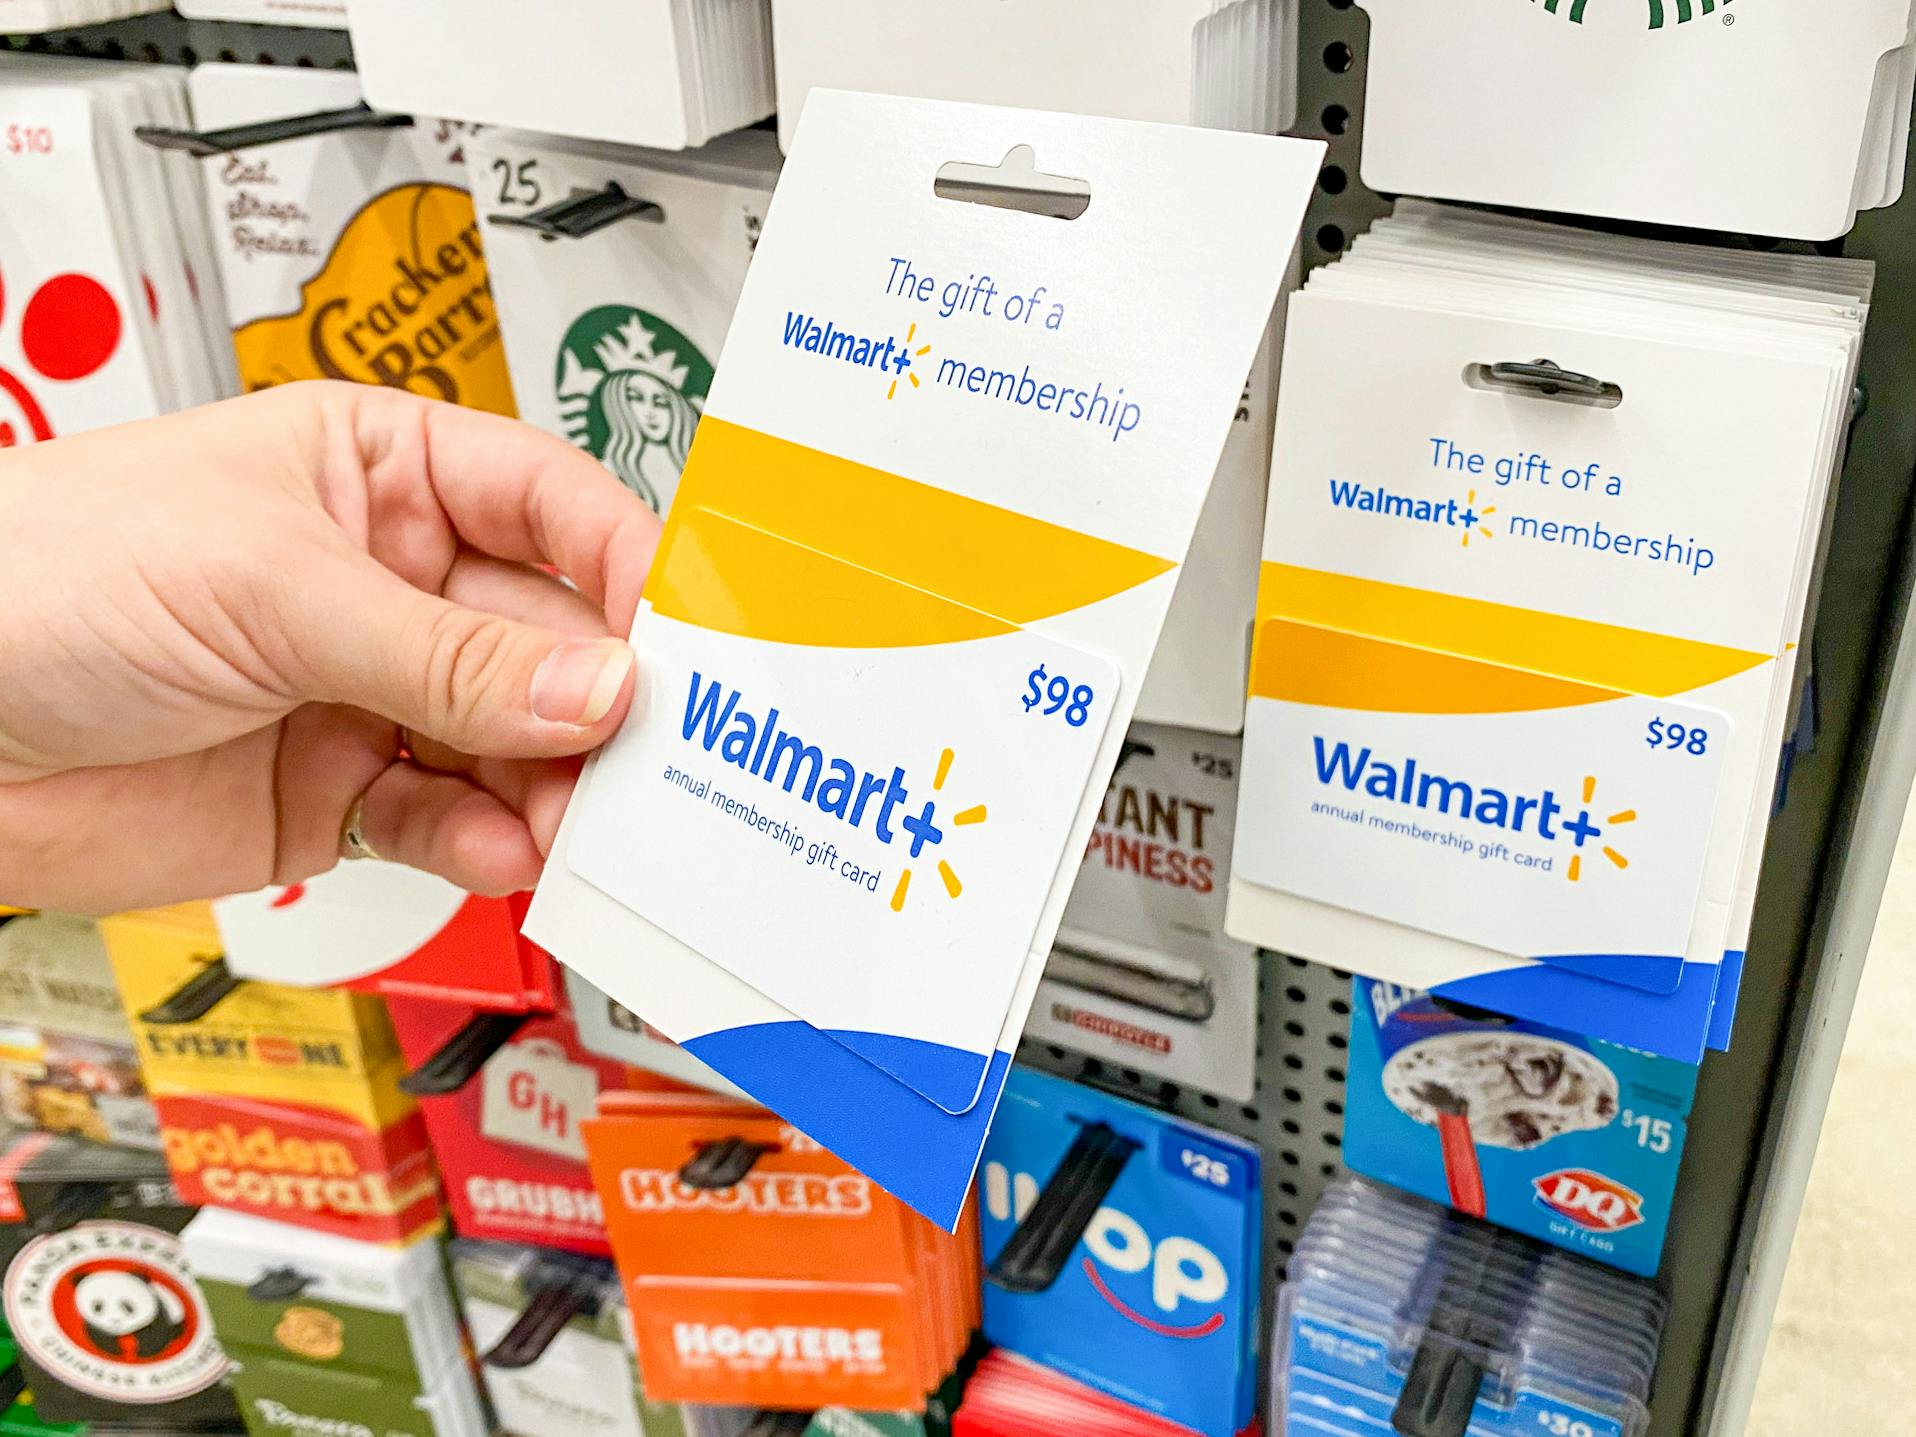 A person's hand taking a Walmart Plus gift card from a display of gift cards at Walmart.